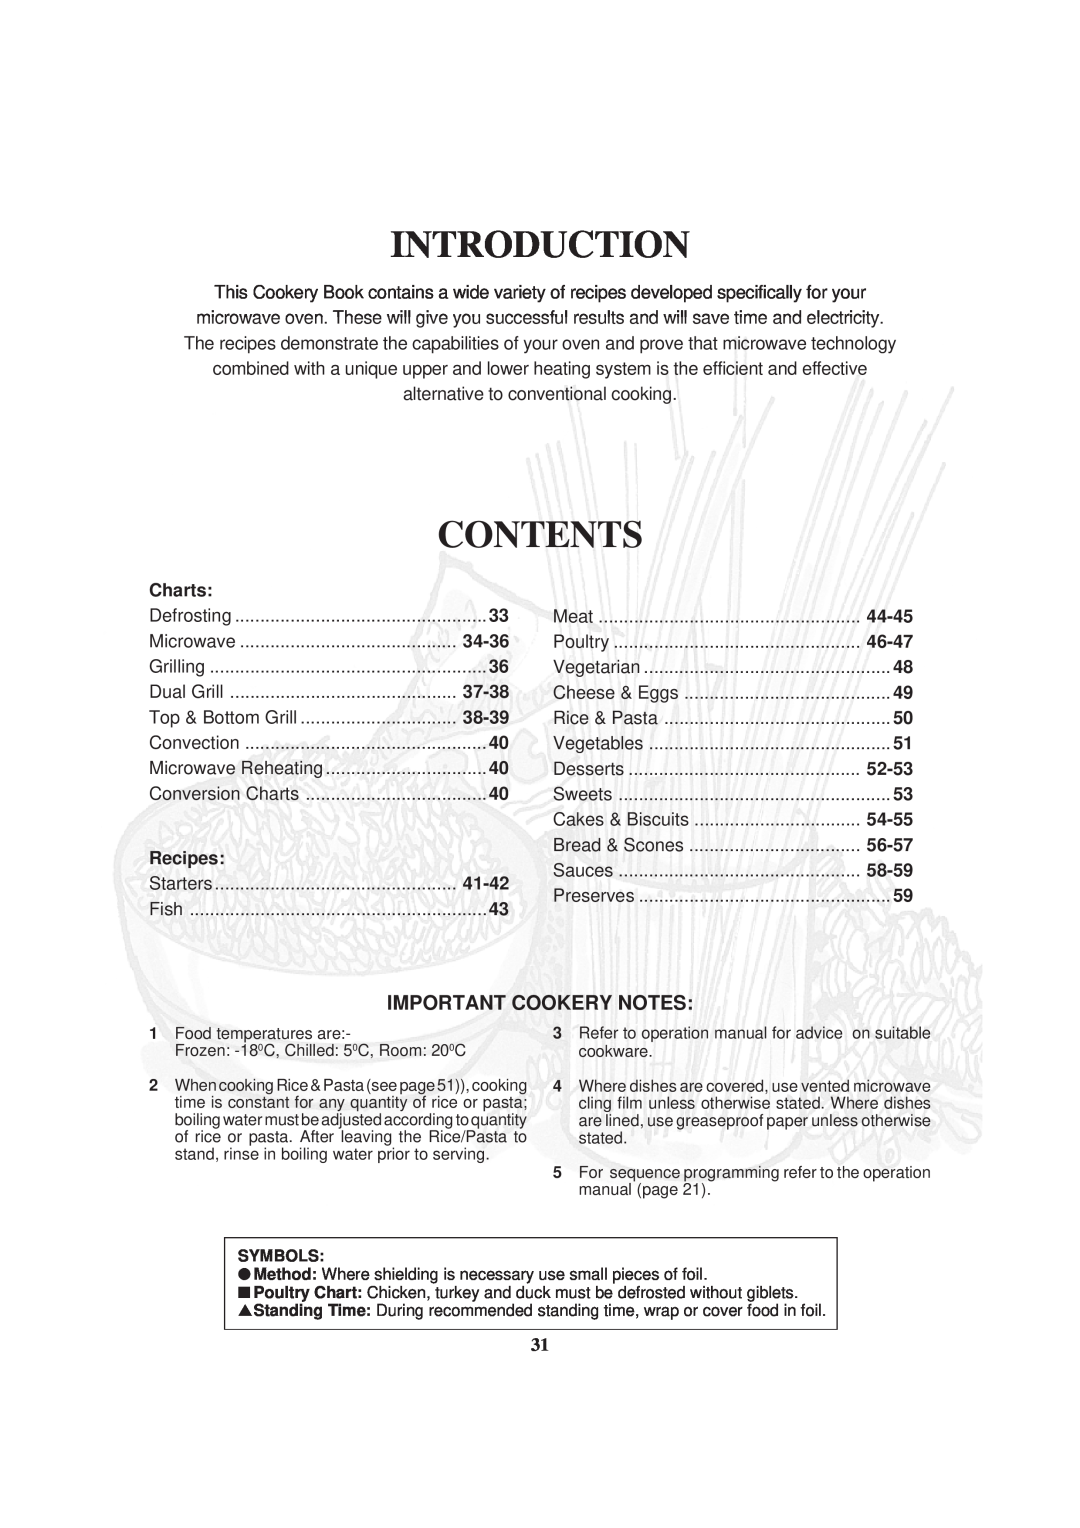 Sharp R-82STM manual Introduction, Contents, Important Cookery Notes 